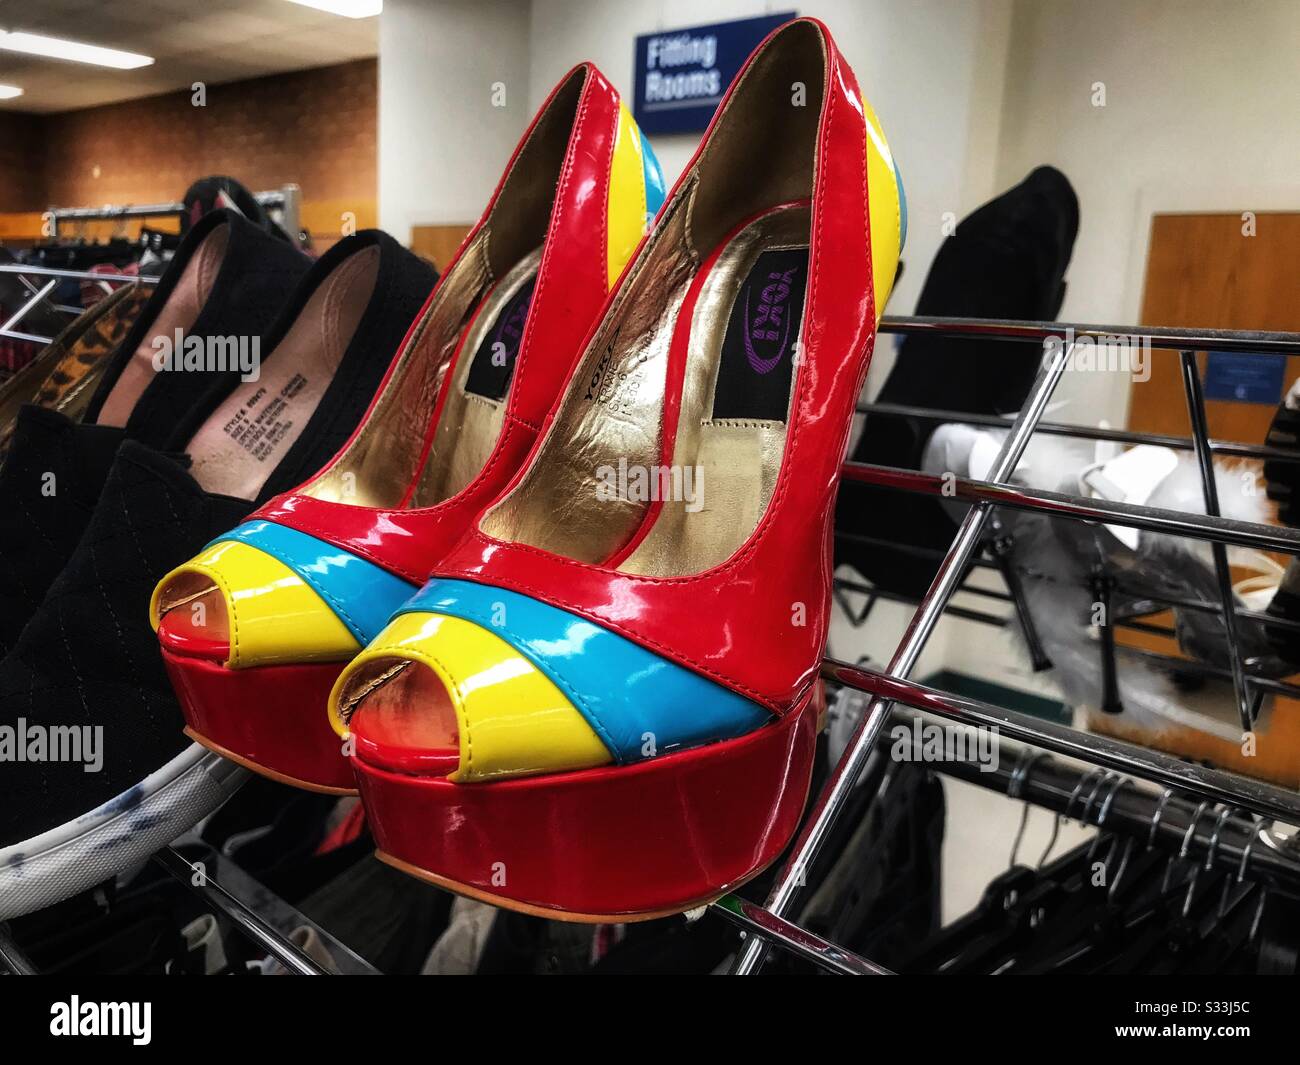 Shoe Store Display High Resolution Stock Photography and Images - Alamy